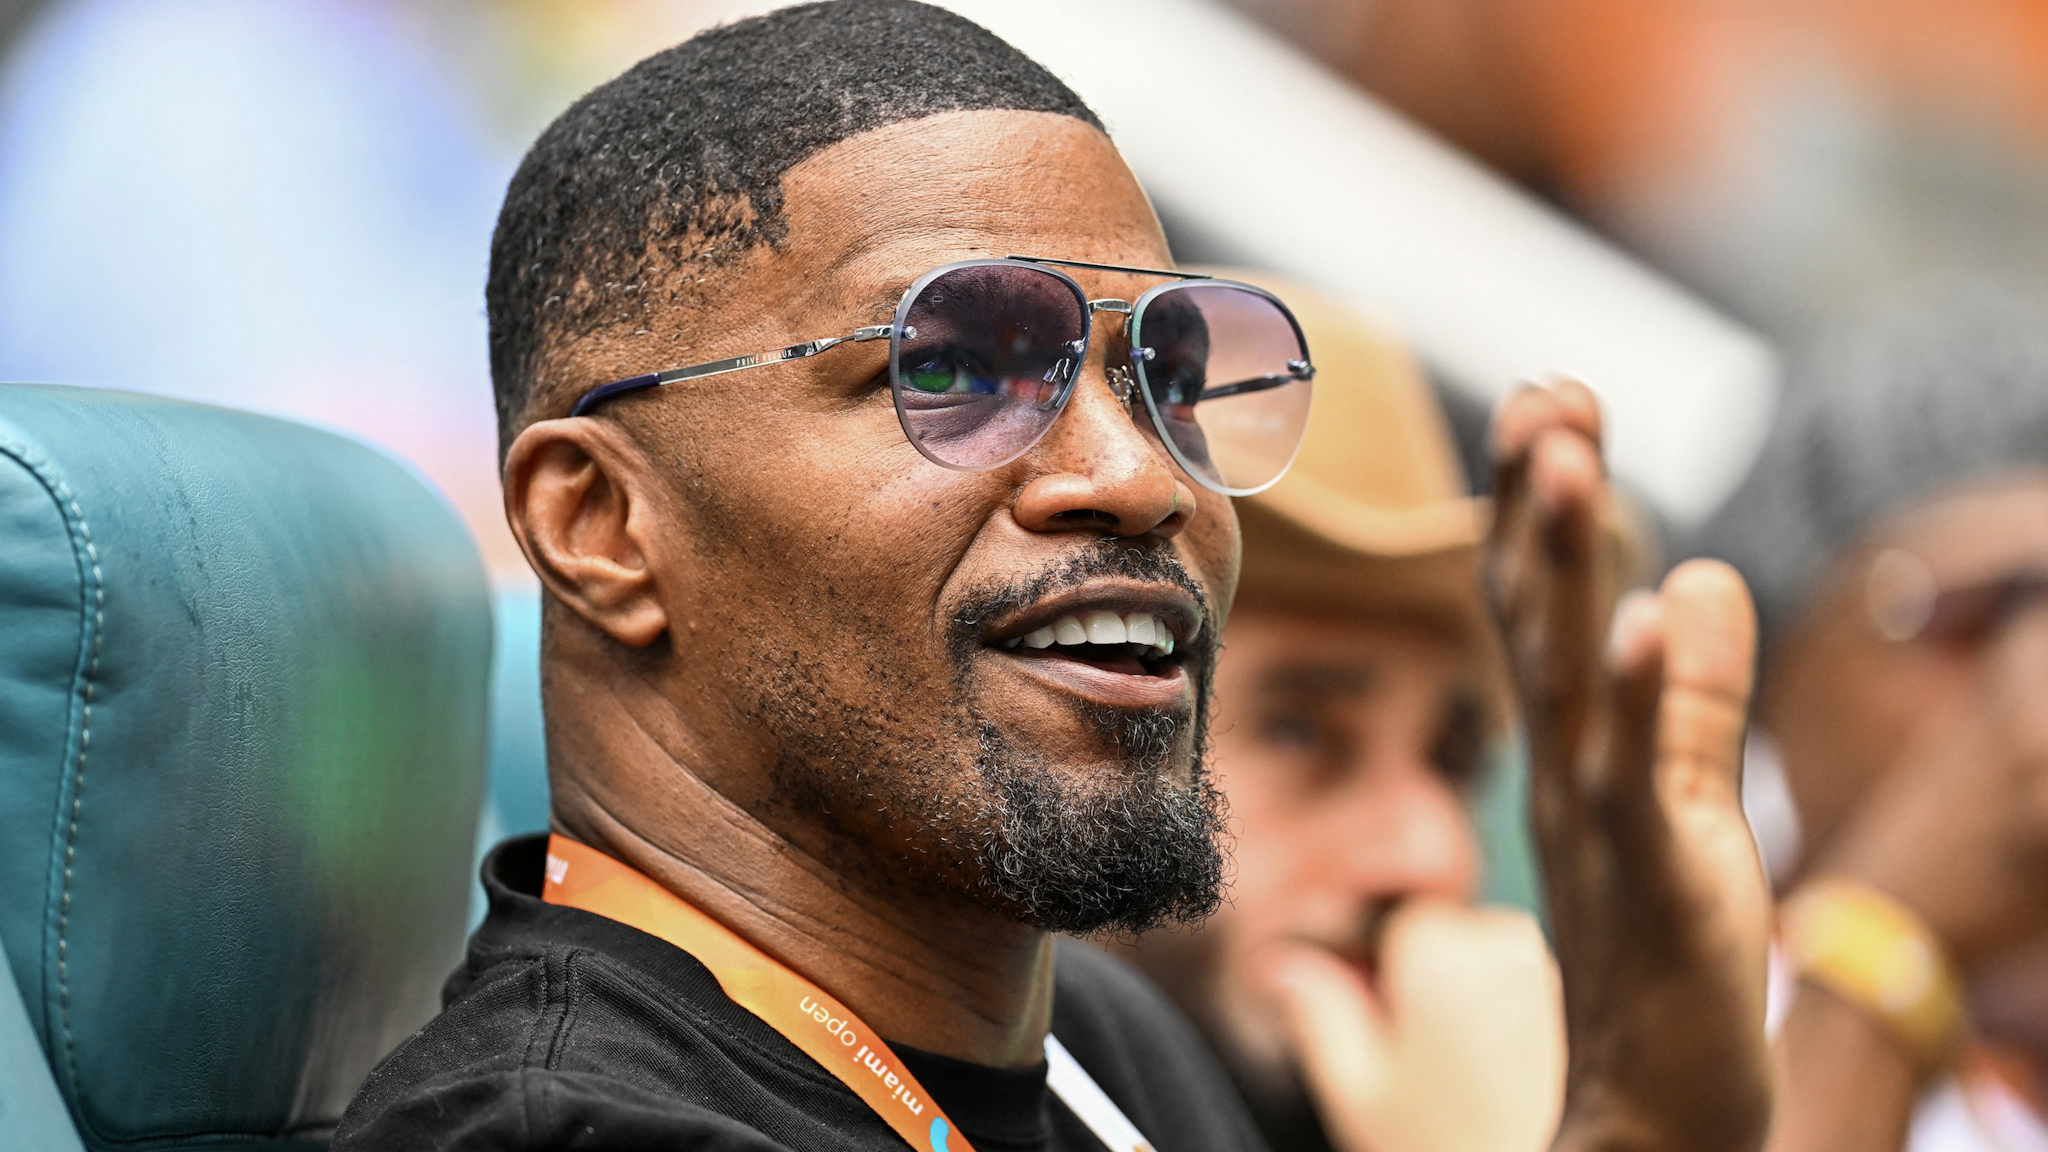 US actor Jamie Foxx attends the mens quater-final match between Christopher Eubanks of the US and Daniil Medvedev of Russia at the 2023 Miami Open at Hard Rock Stadium in Miami Gardens, Florida, on March 30, 2023.